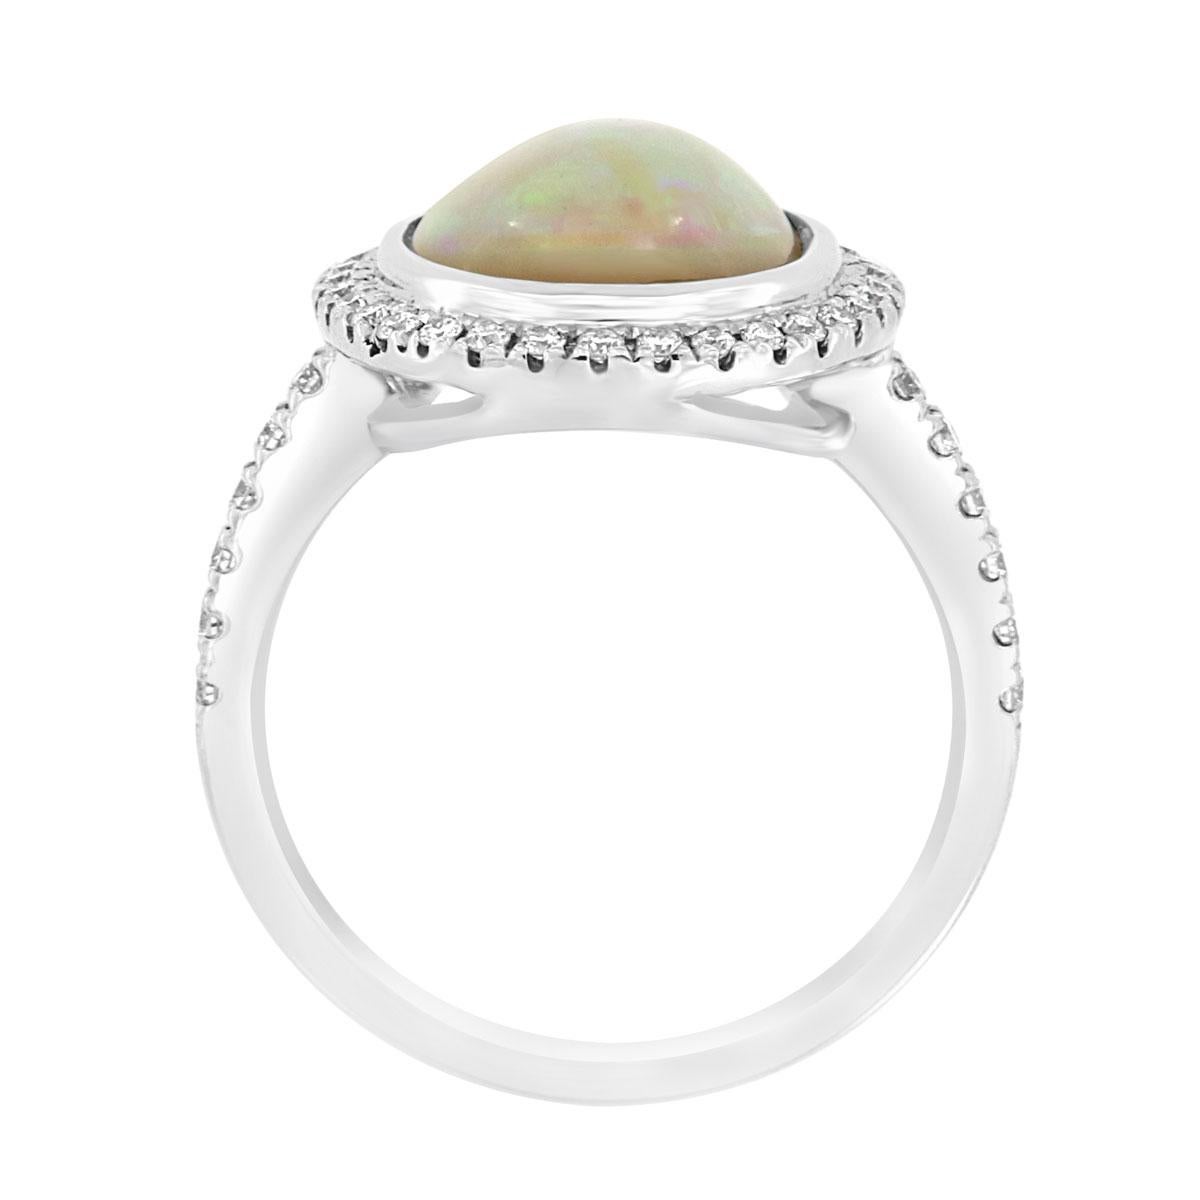 This colorful opal and diamond ring features an oval opal framed by Micro prong round brilliant diamonds in 18k white gold. Experience the Difference!

Product details: 

Center Gemstone Type: Opal
Center Gemstone Carat Weight: 2.26
Center Gemstone